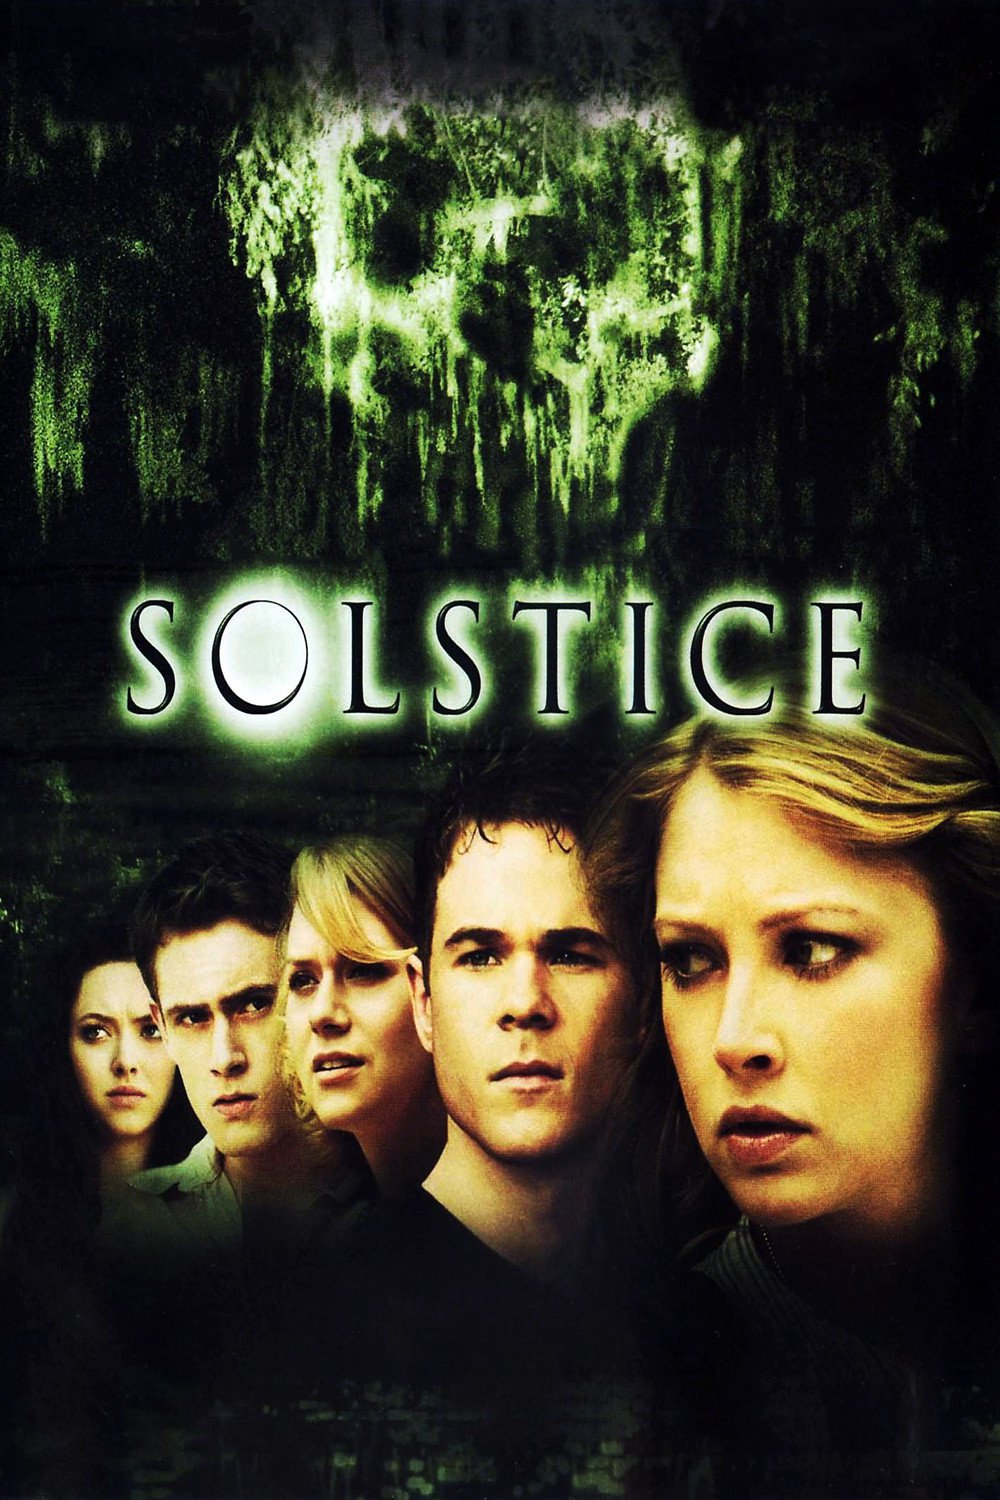 Poster for the movie "Solstice"